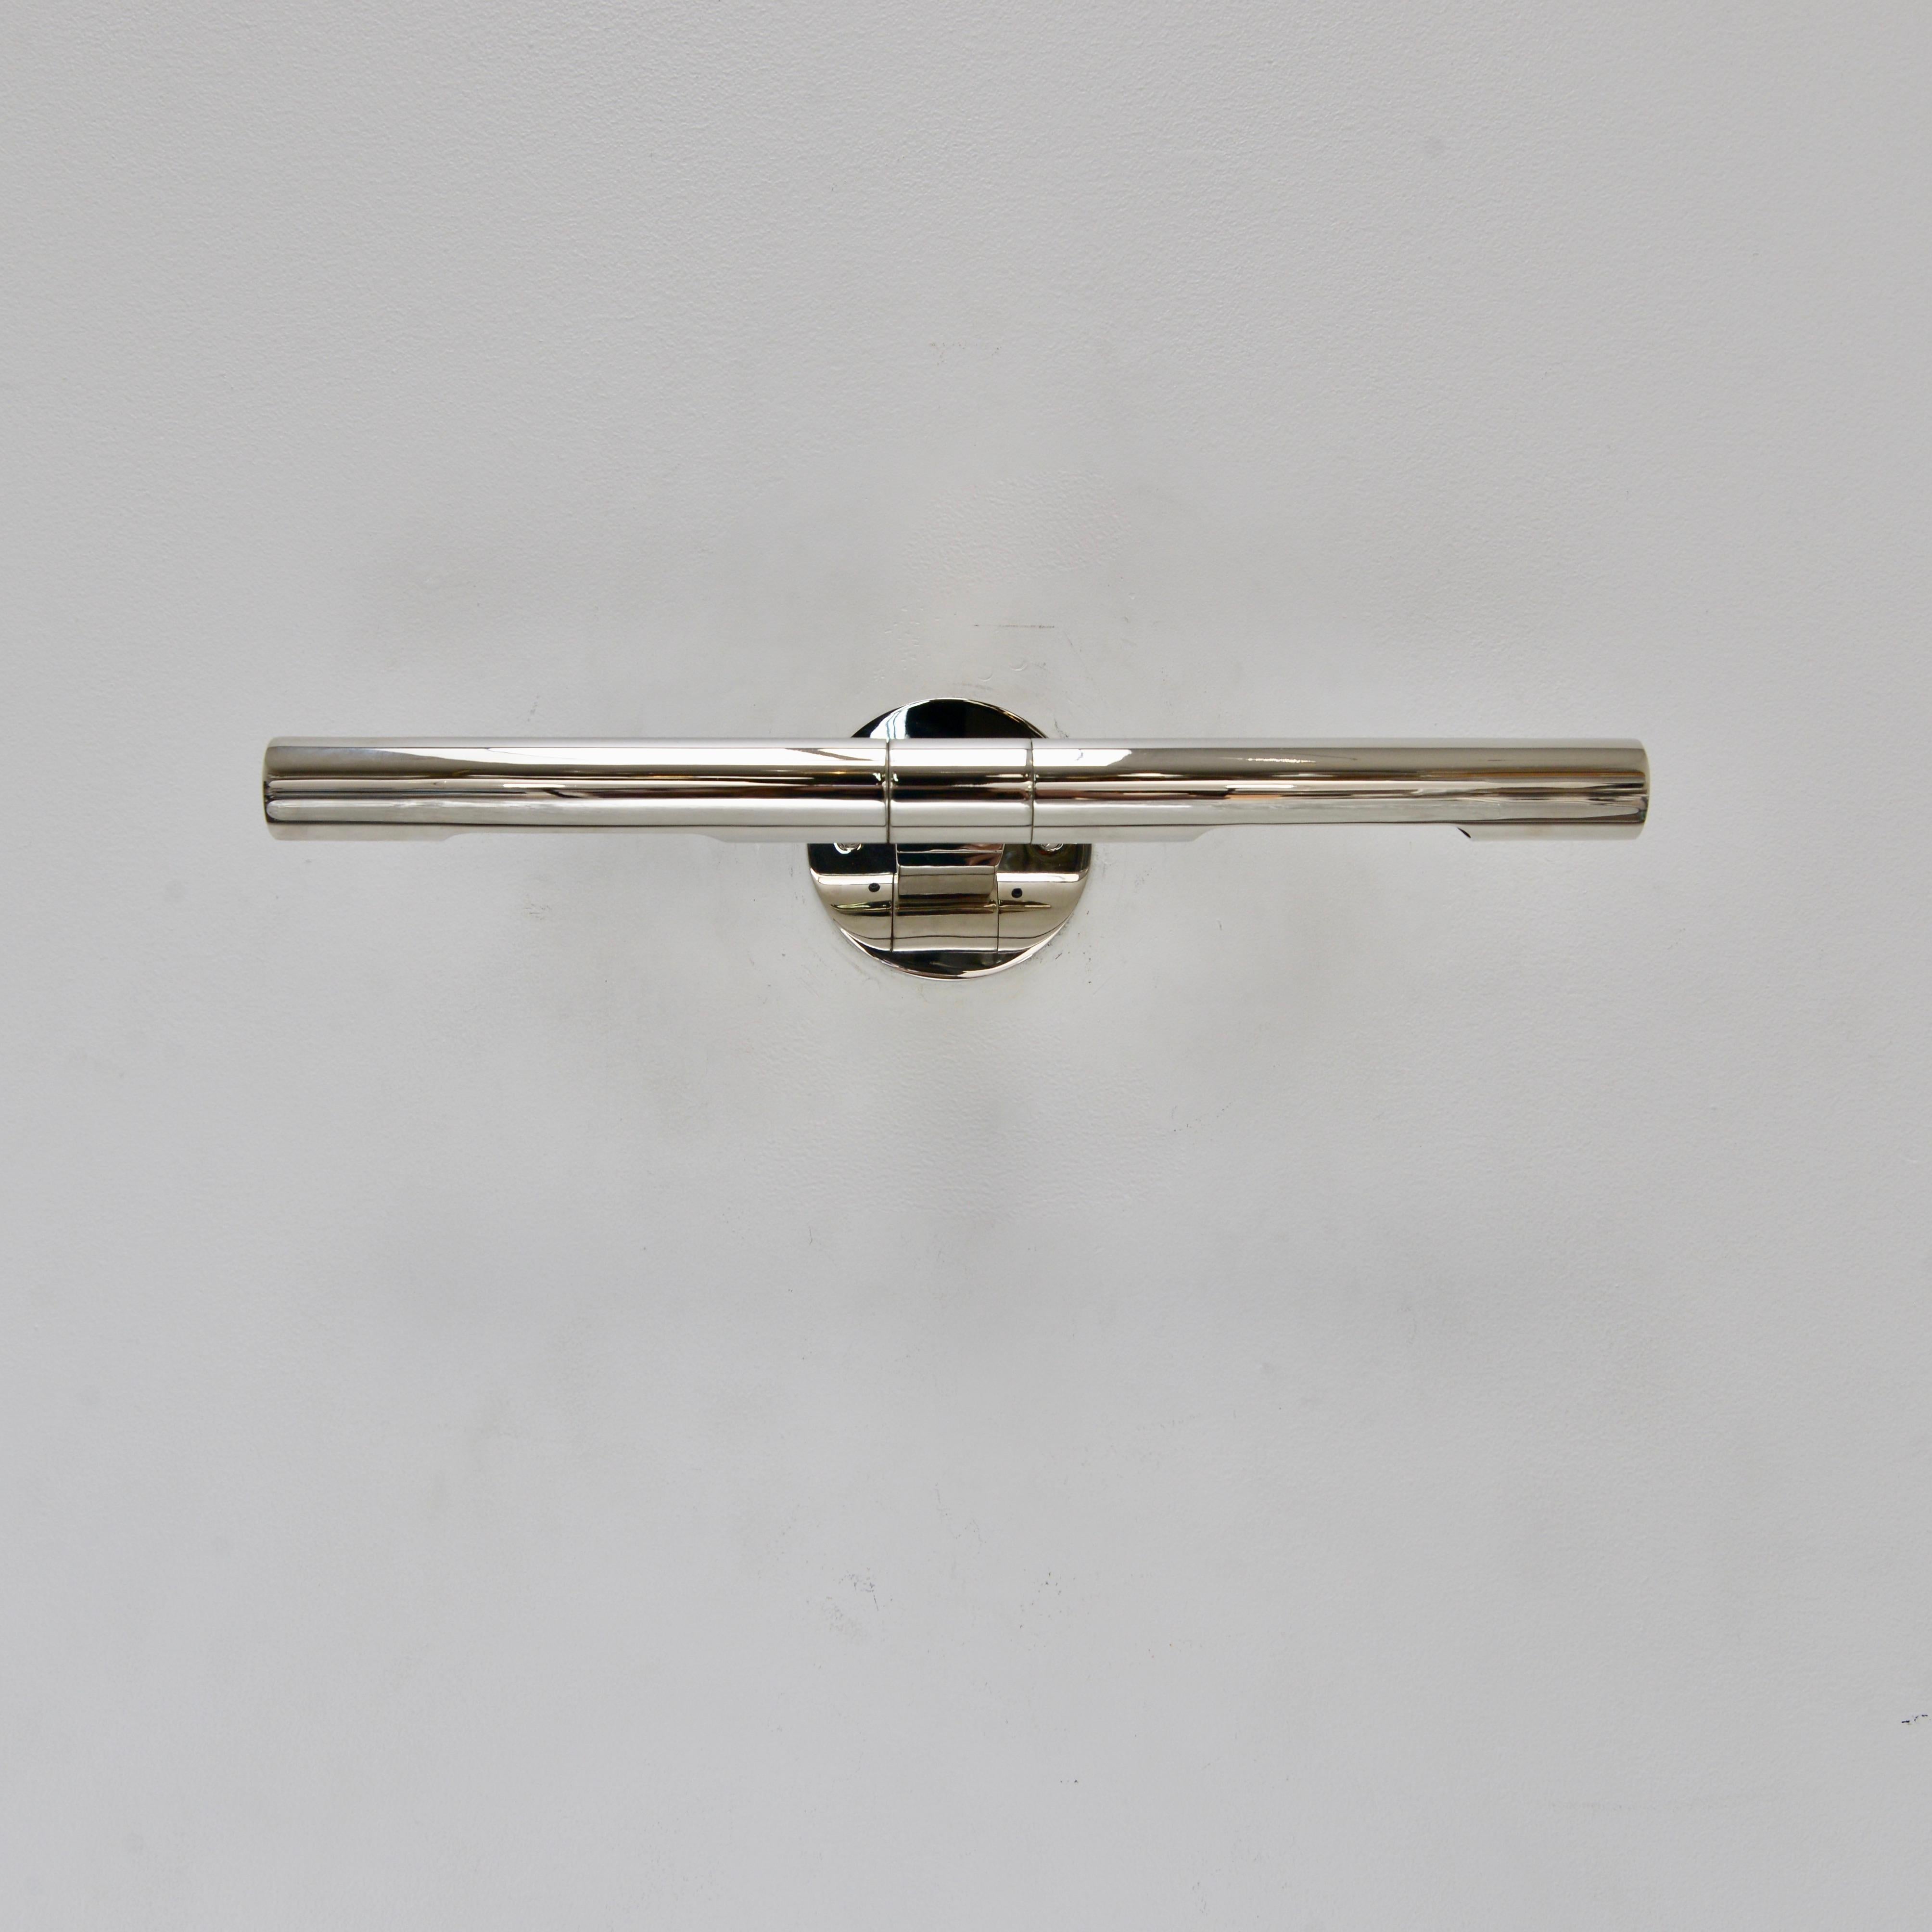 Superbly crafted linear wall sconce designed by Lumfardo Luminaires in a polished nickel finish. Sconce is designed to feature artwork and/or objects d’art. Each shade is independent and can be directed individually. Fixture comes with mounting